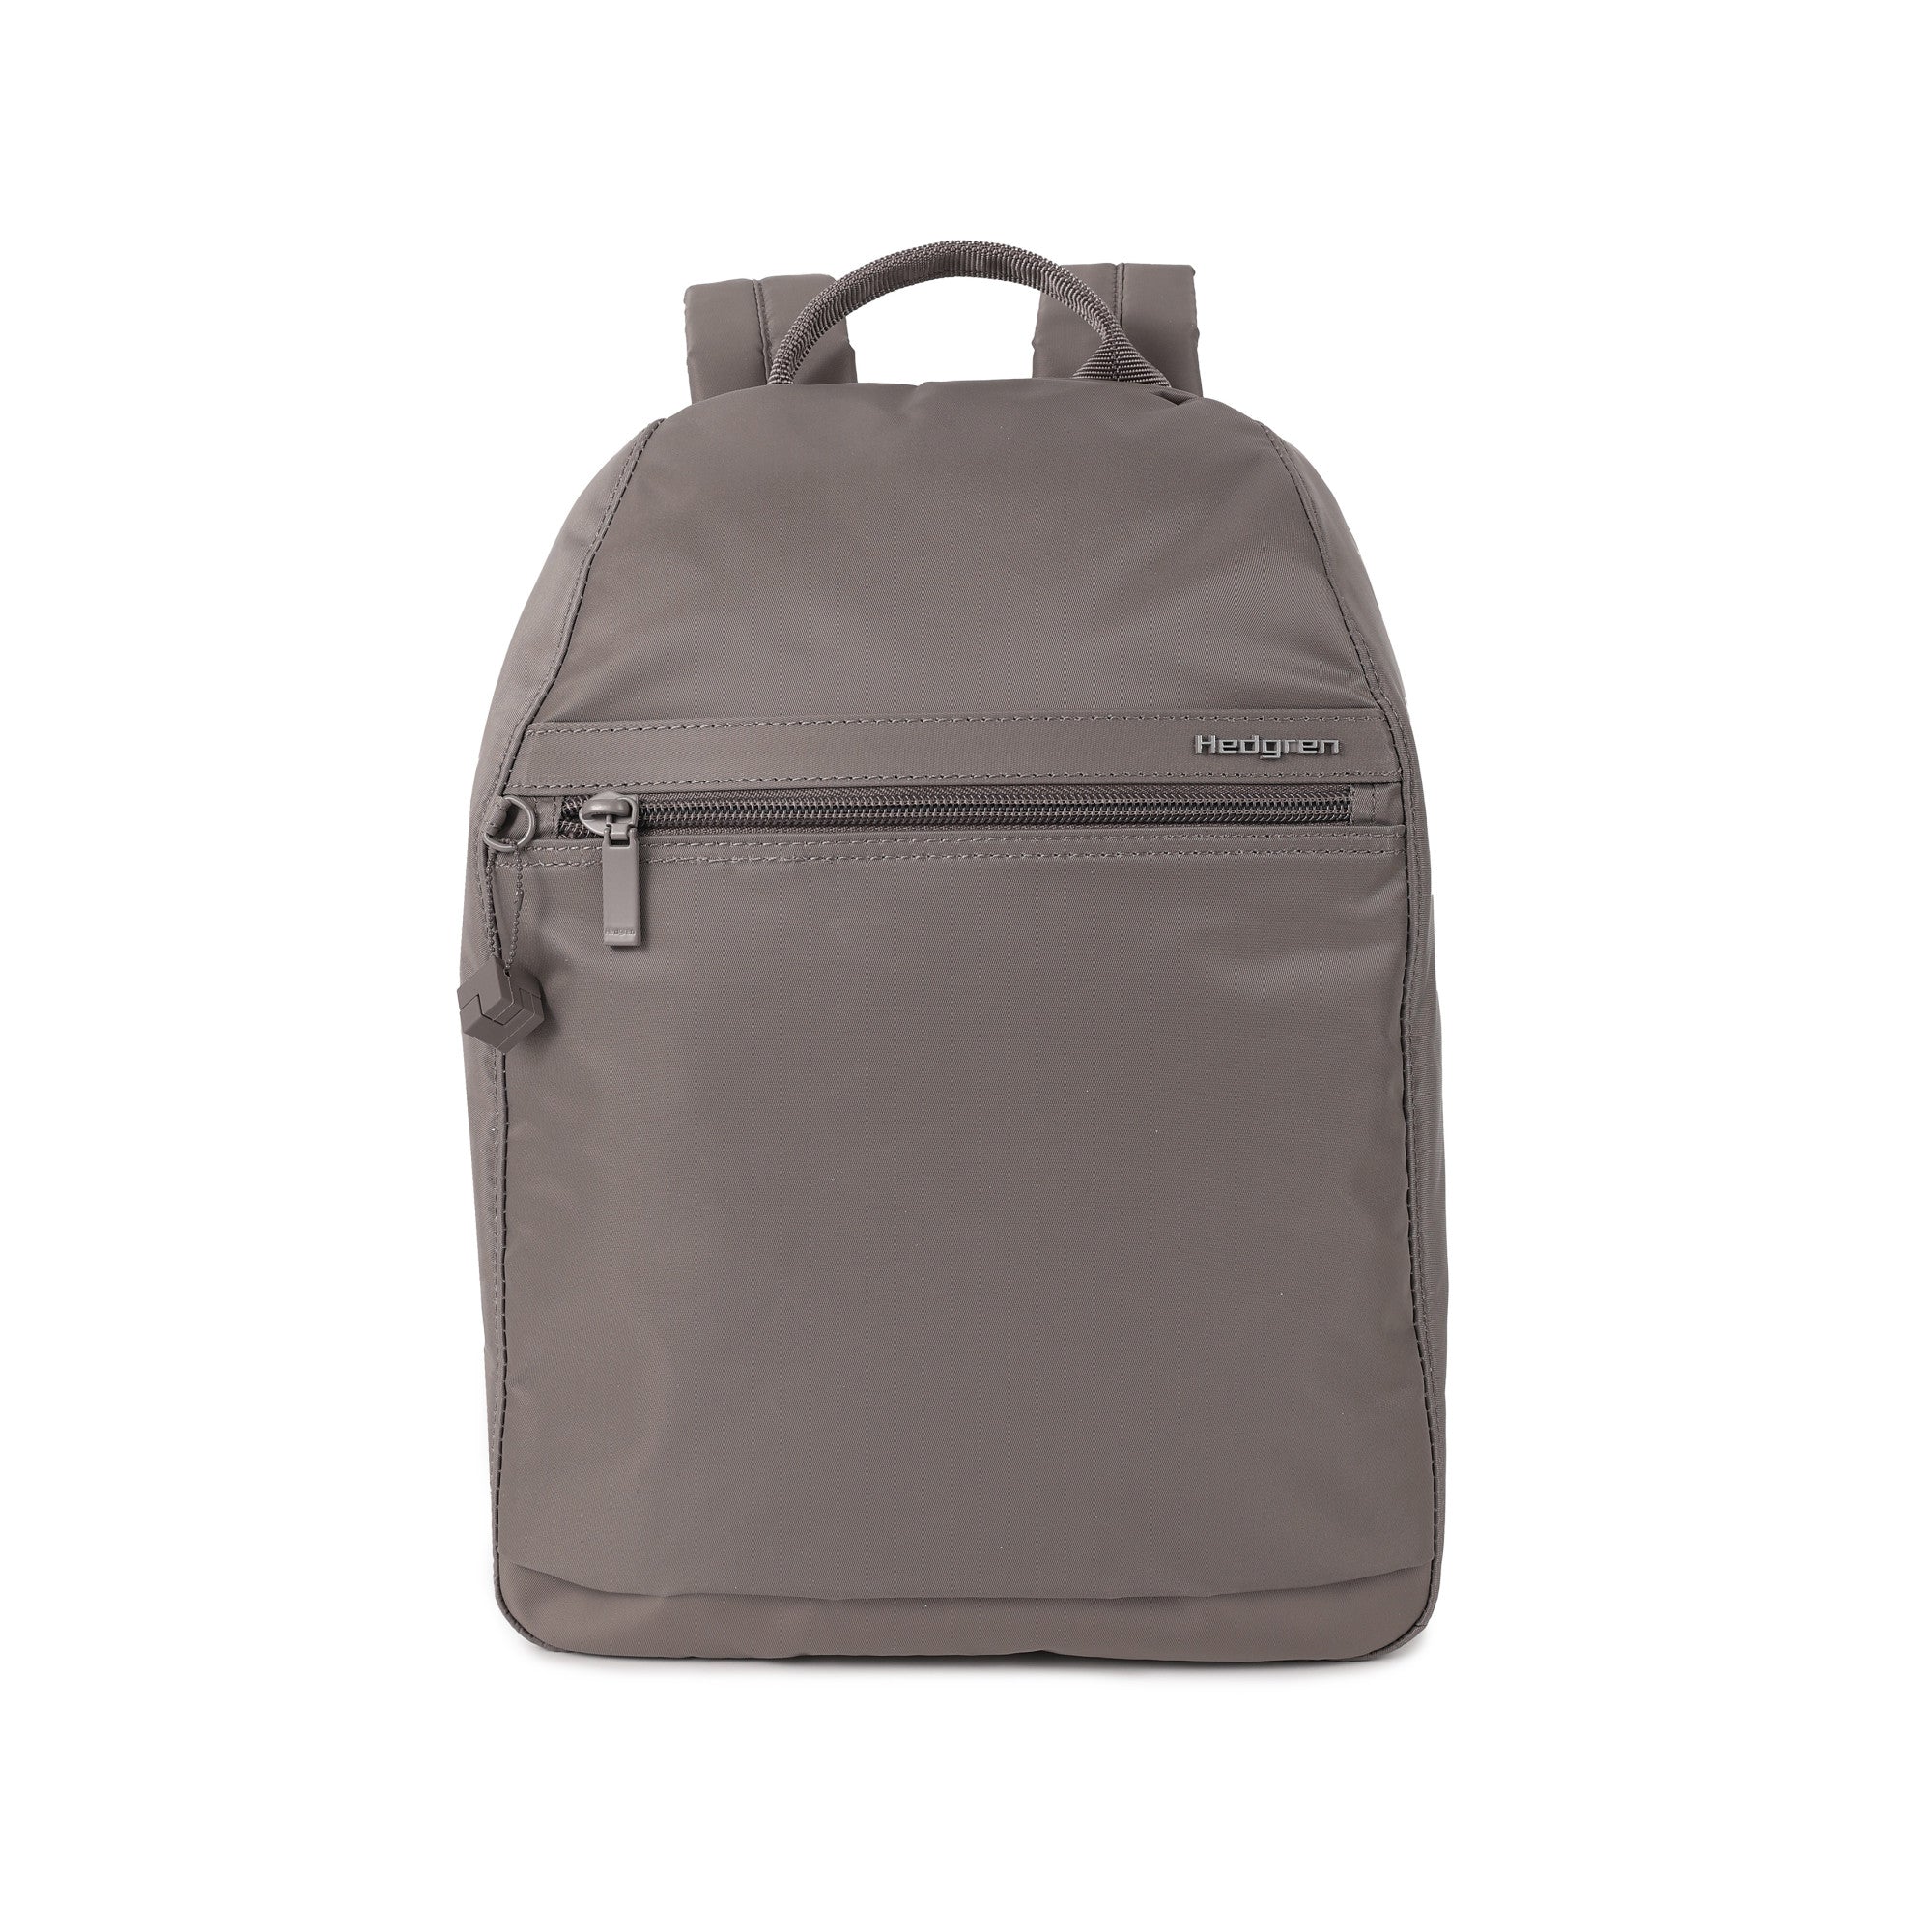 Hedgren Vogue Backpack Small RFID - Sepia